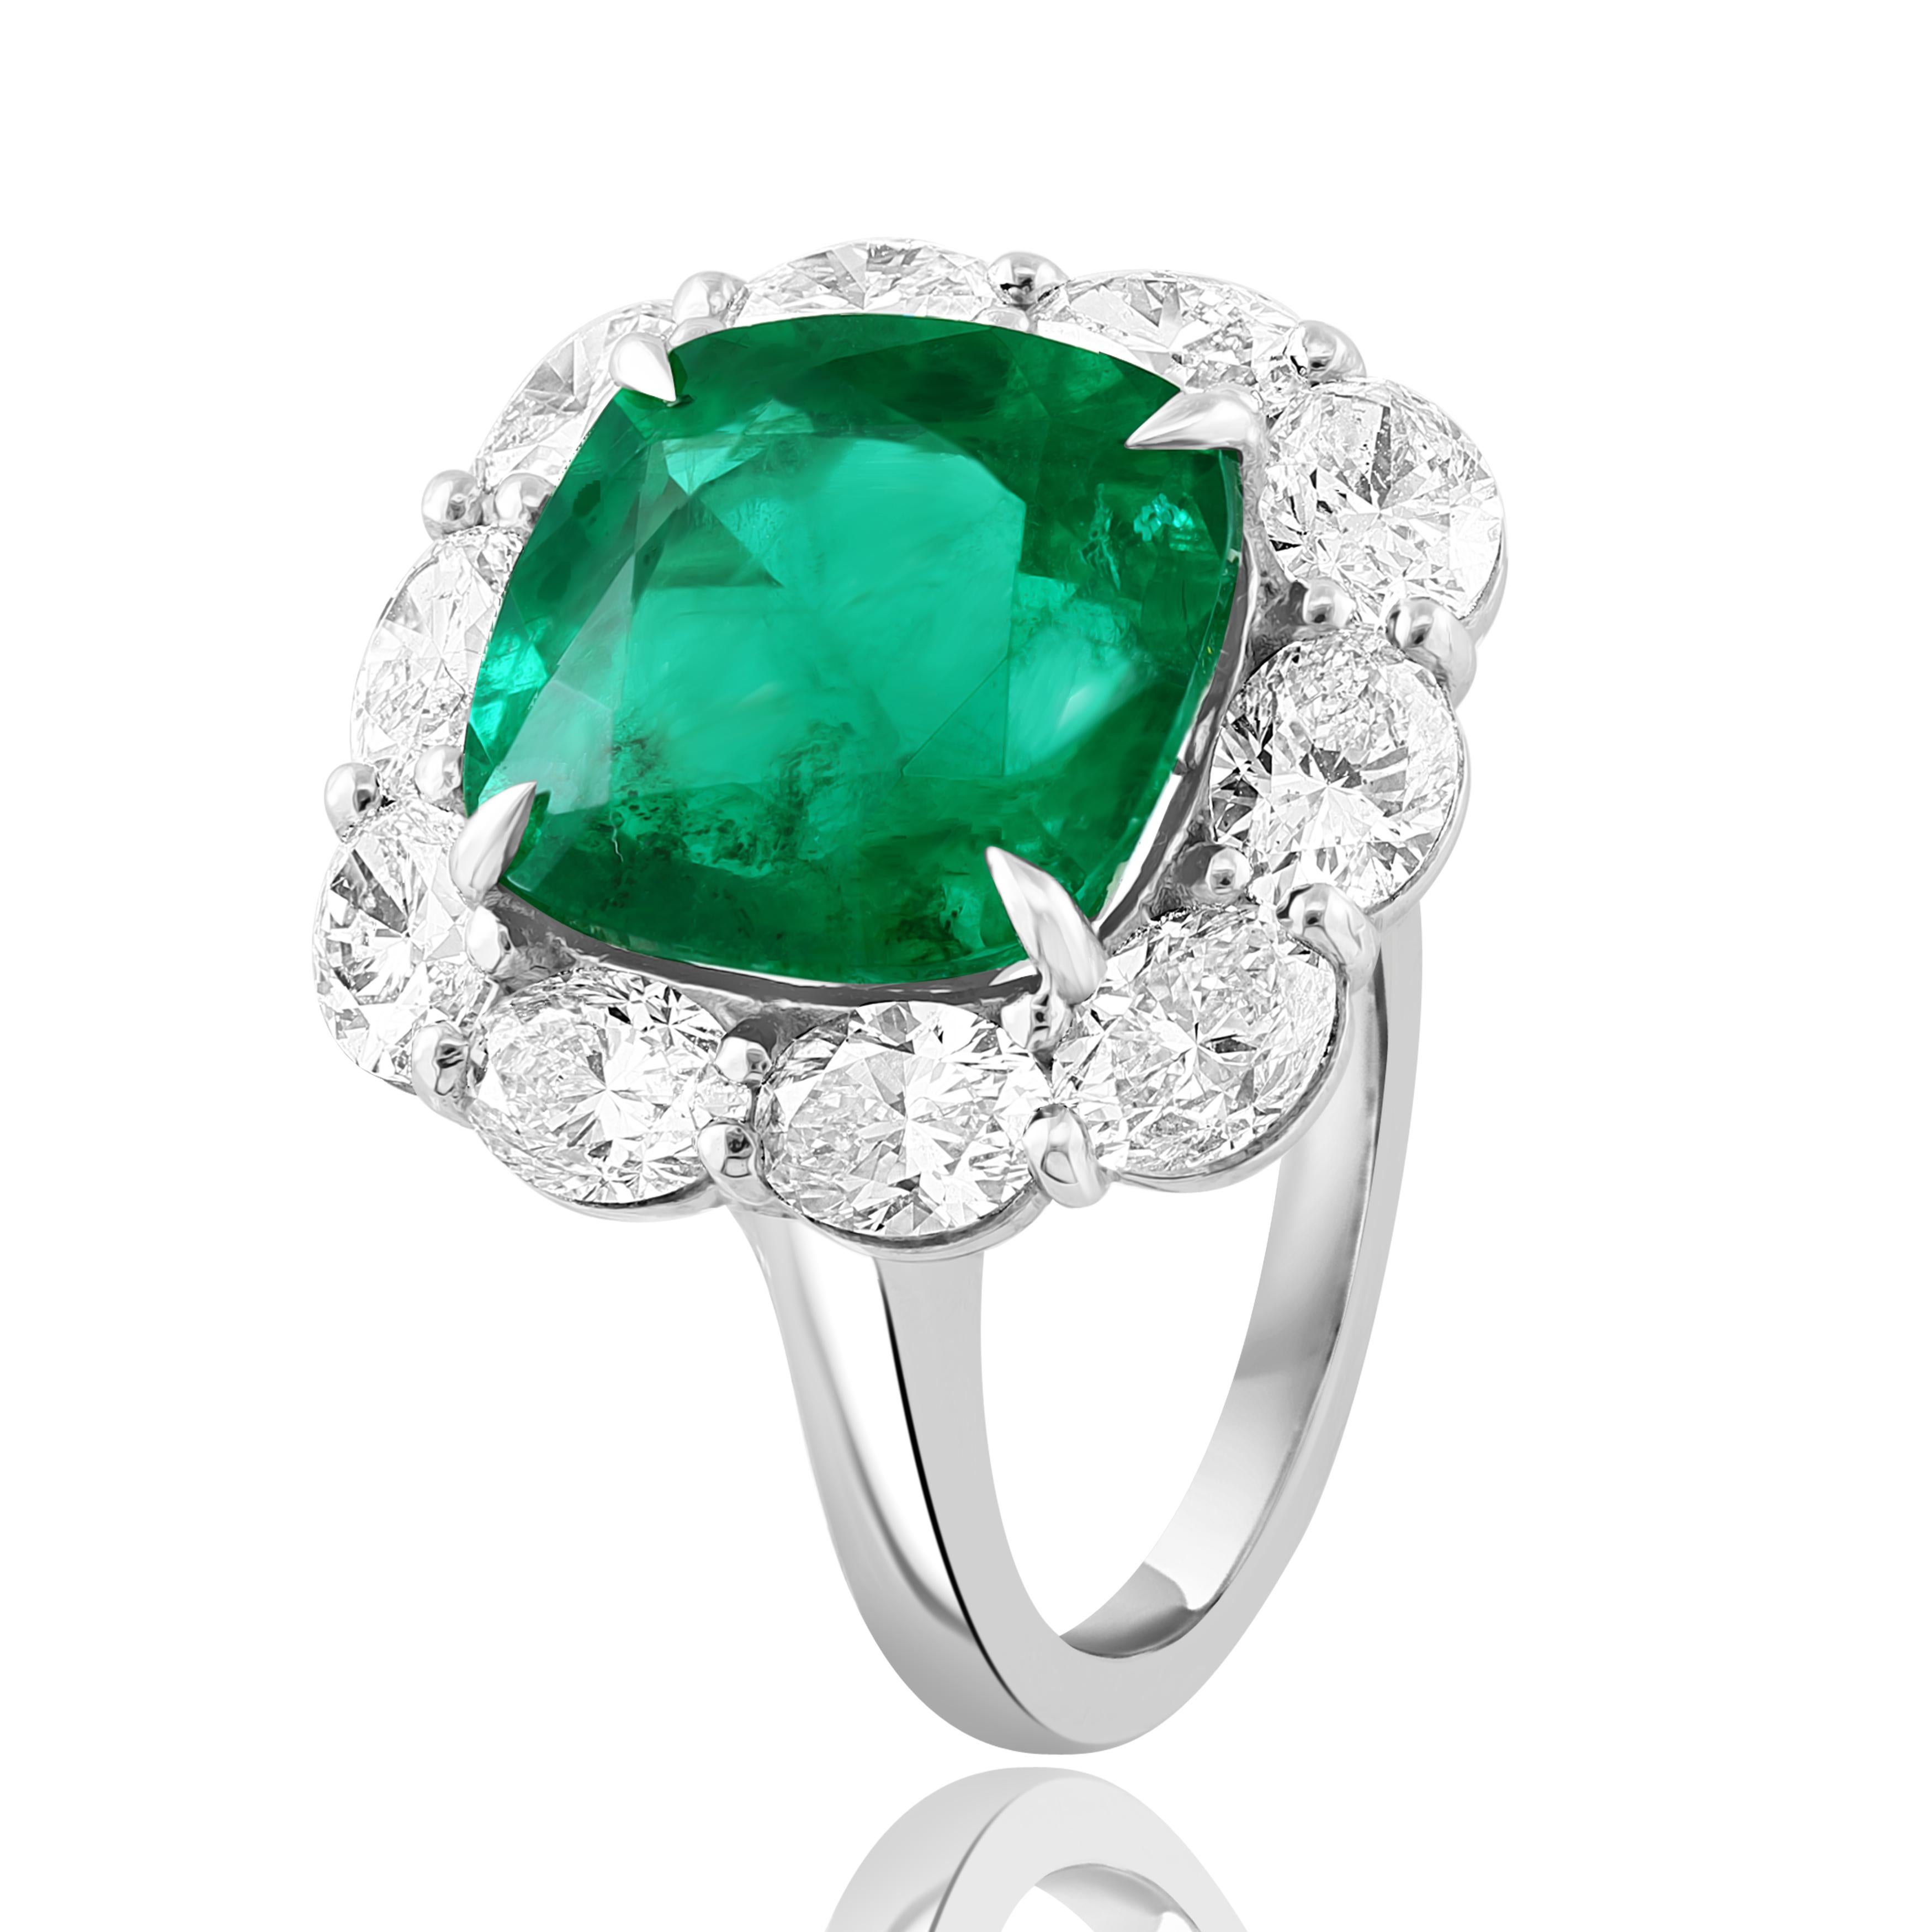 Certified 6.58 Carat Cushion Cut Emerald Diamond Ring in Platinum In New Condition For Sale In NEW YORK, NY